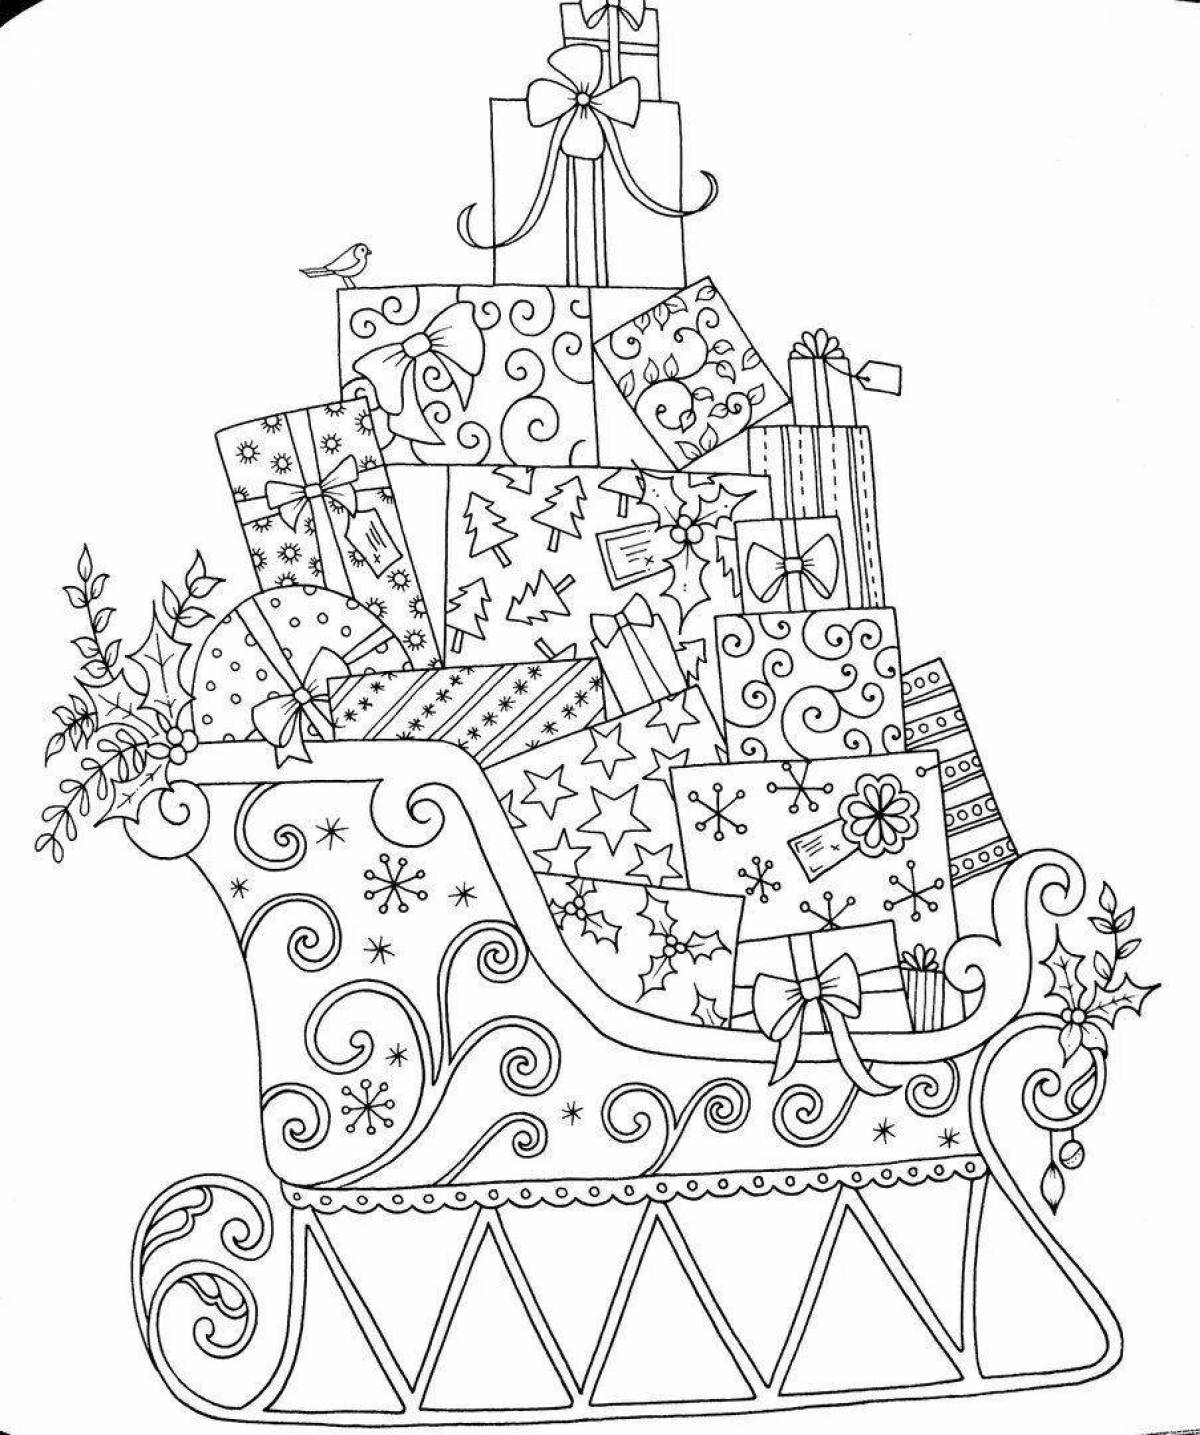 Grandiloquent coloring page castle new year